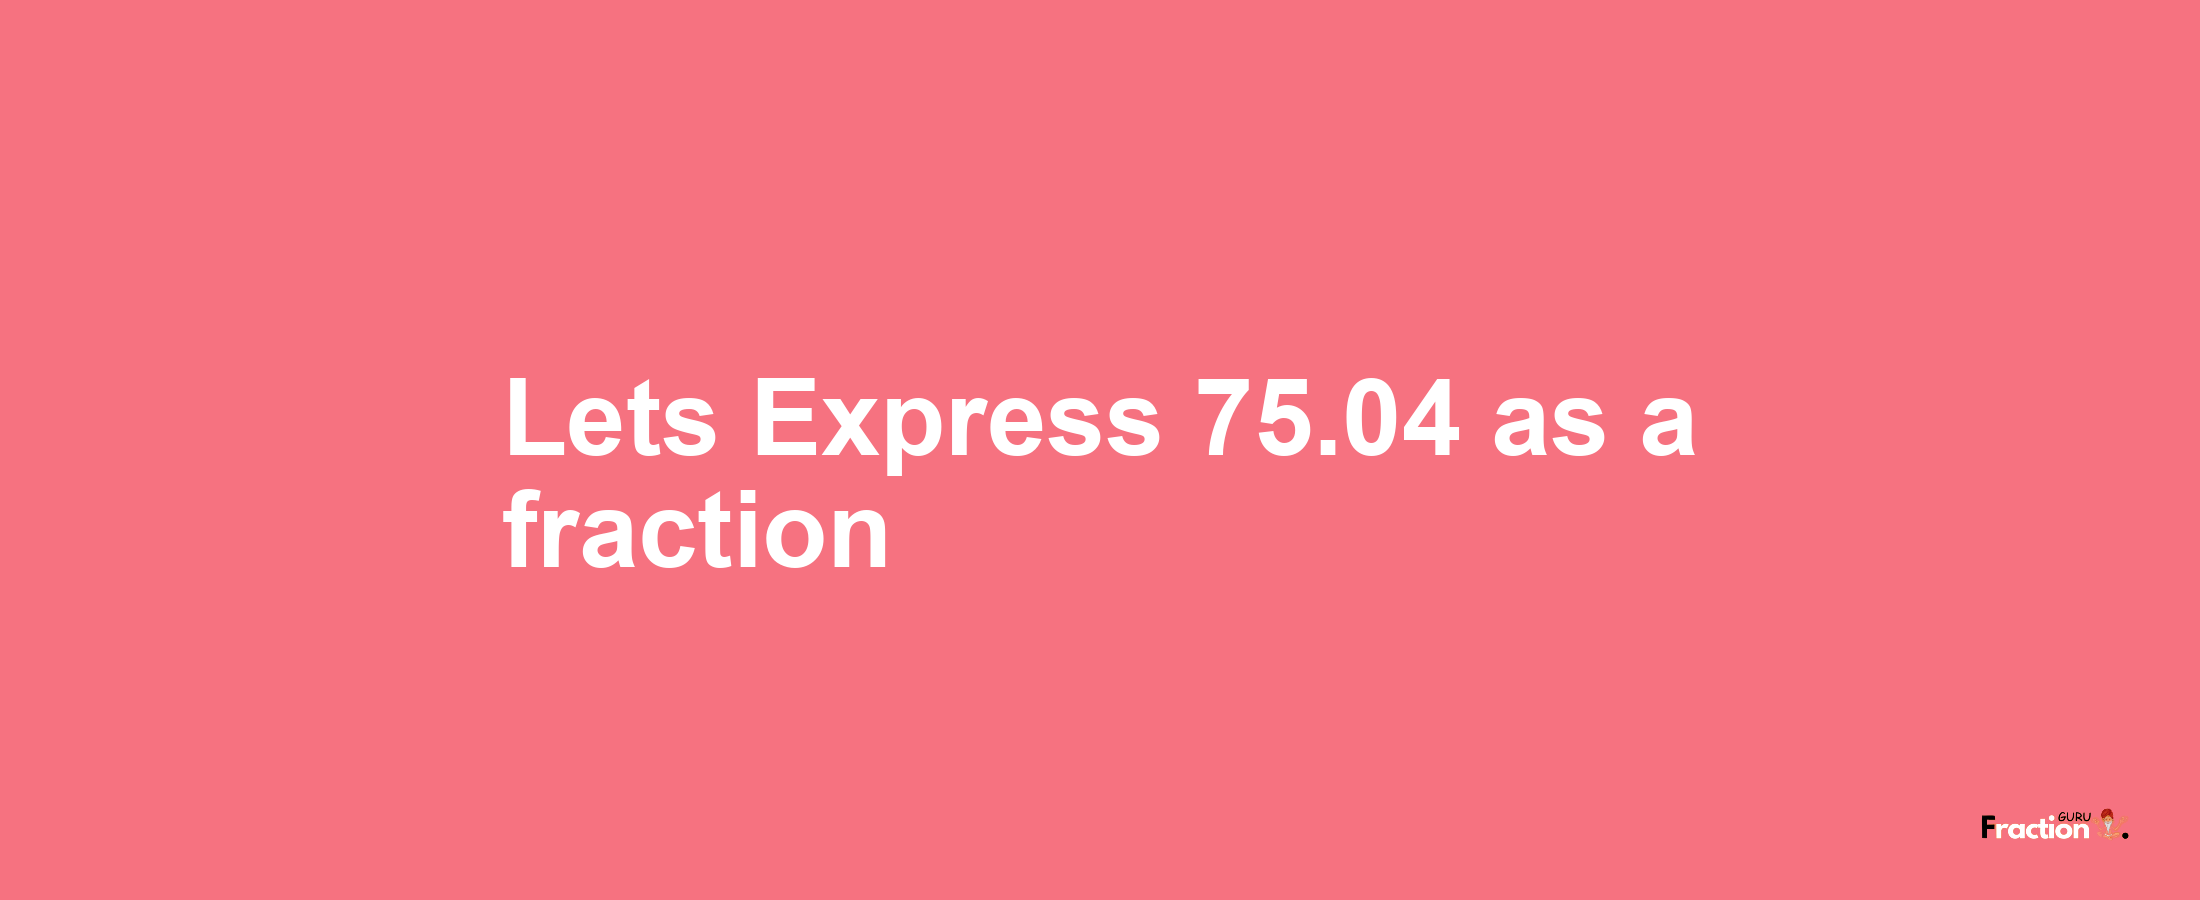 Lets Express 75.04 as afraction